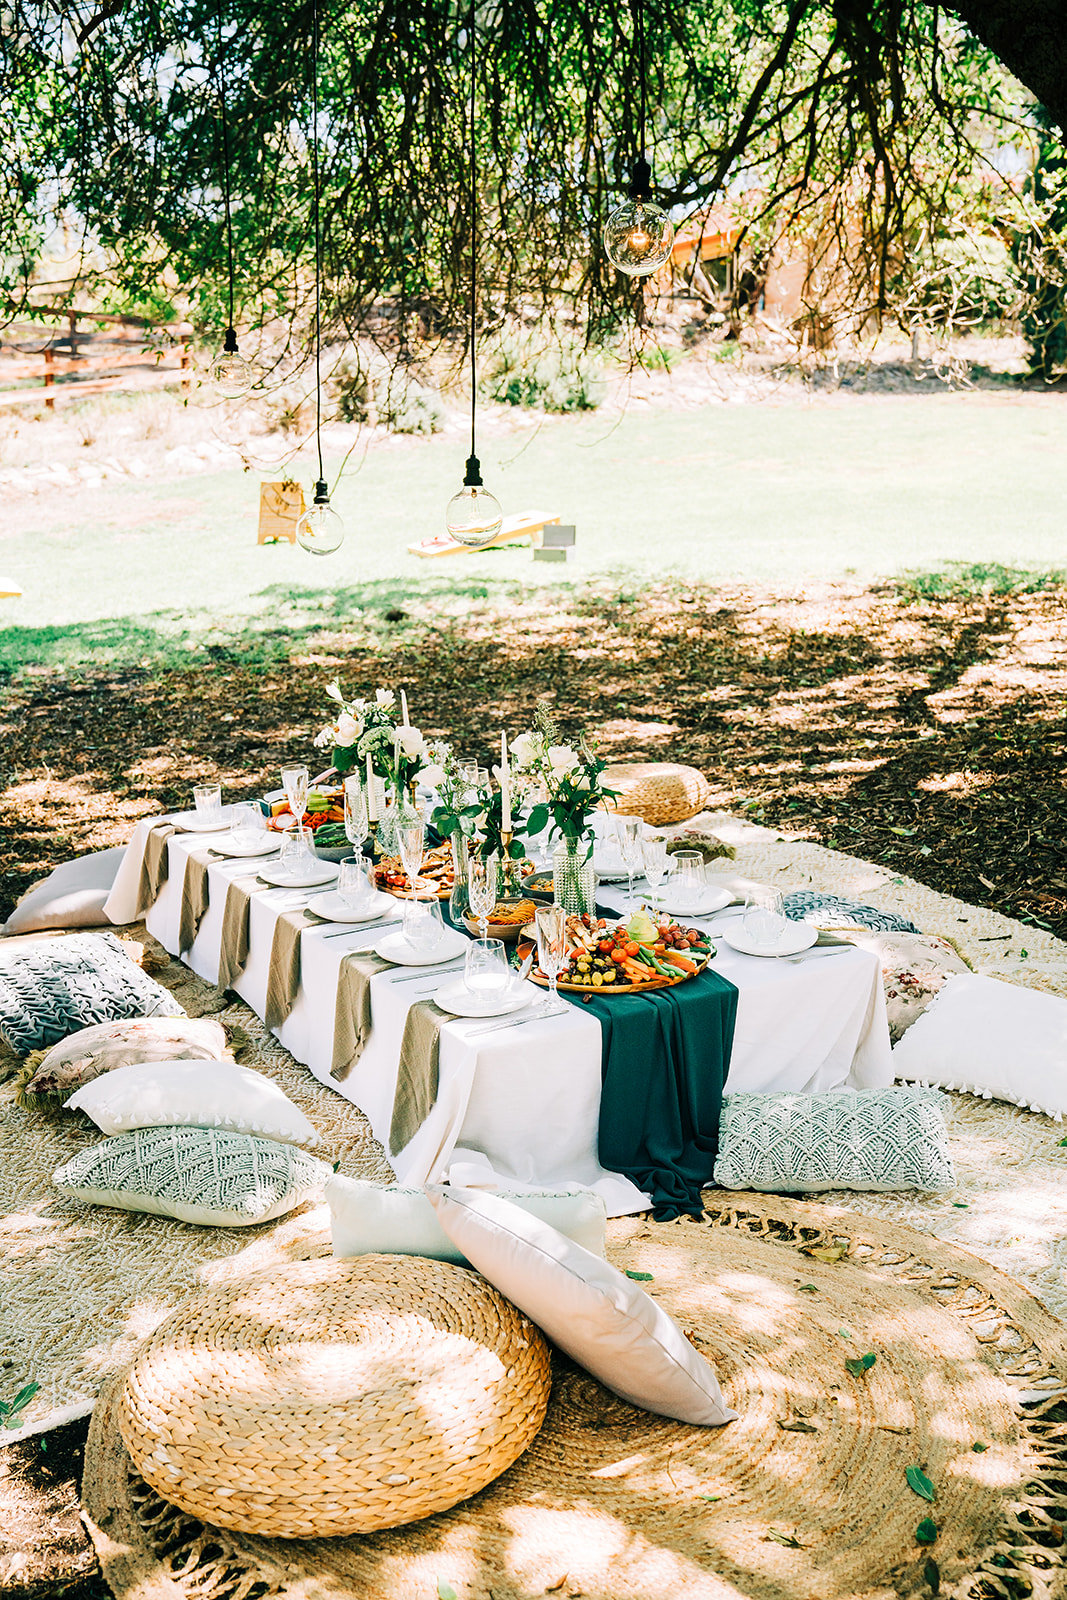 A unique and captivating Adelaide Hills wedding venue nestled on the site of an old copper smelter, The Brae Dawesley is a flexible dry-hire property offering elopements through to large celebrations and onsite accommodation for the couple.